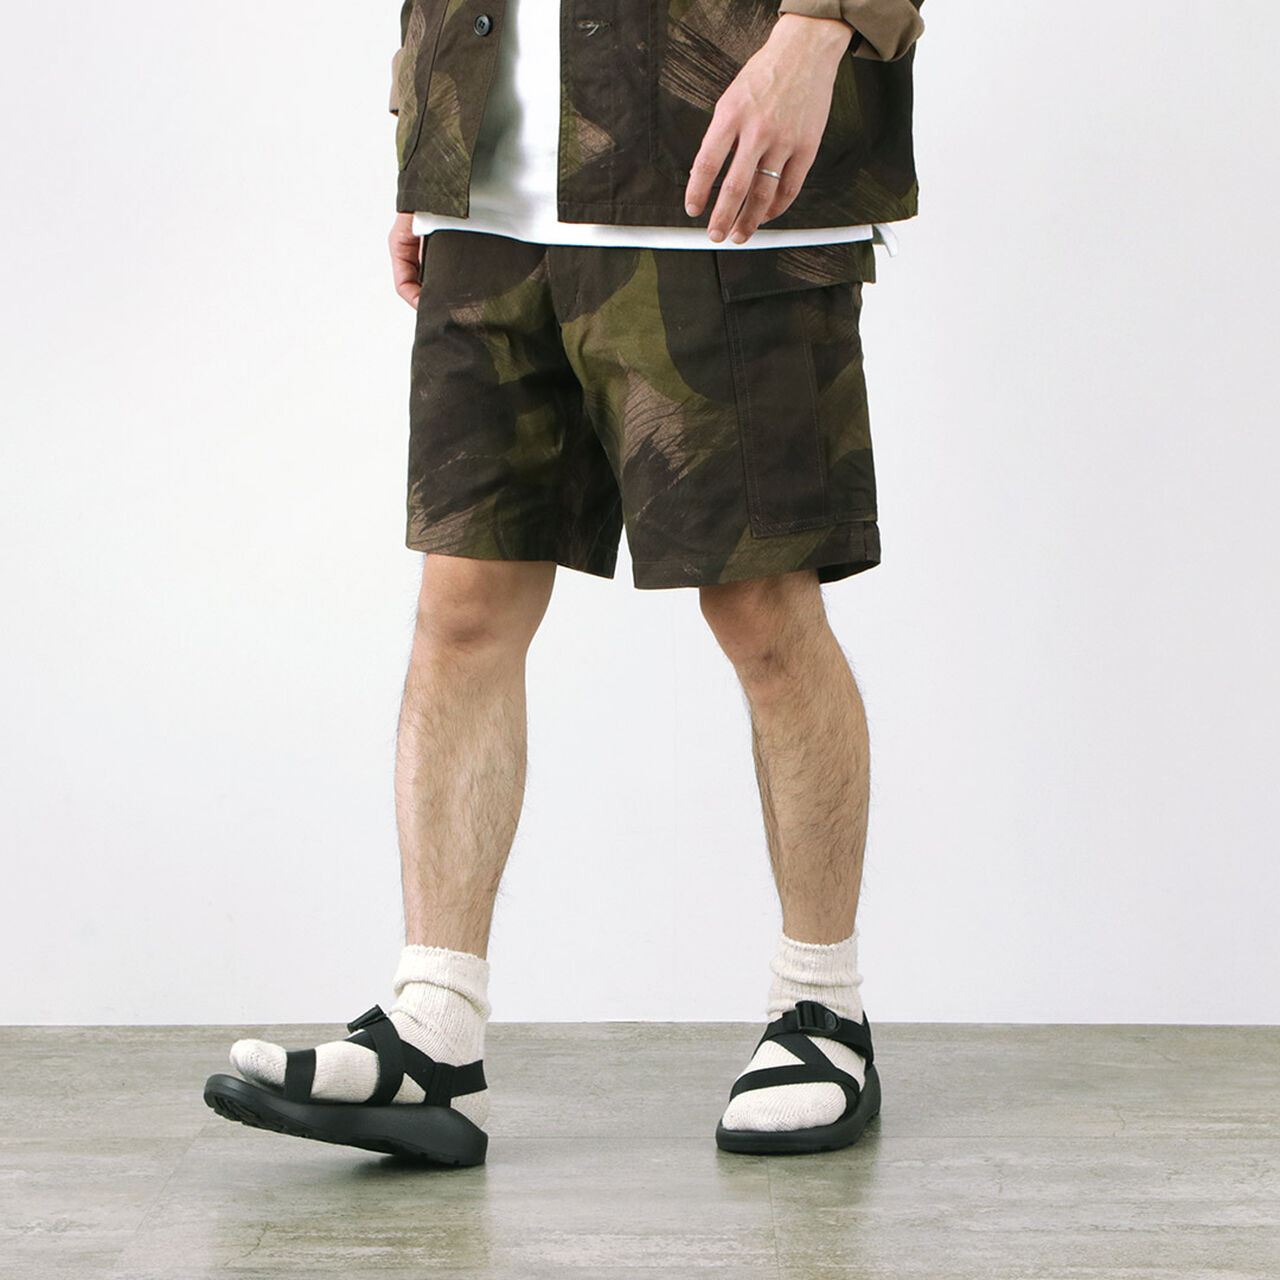 F4169 M-65 Field Cargo Shorts,Camo, large image number 0